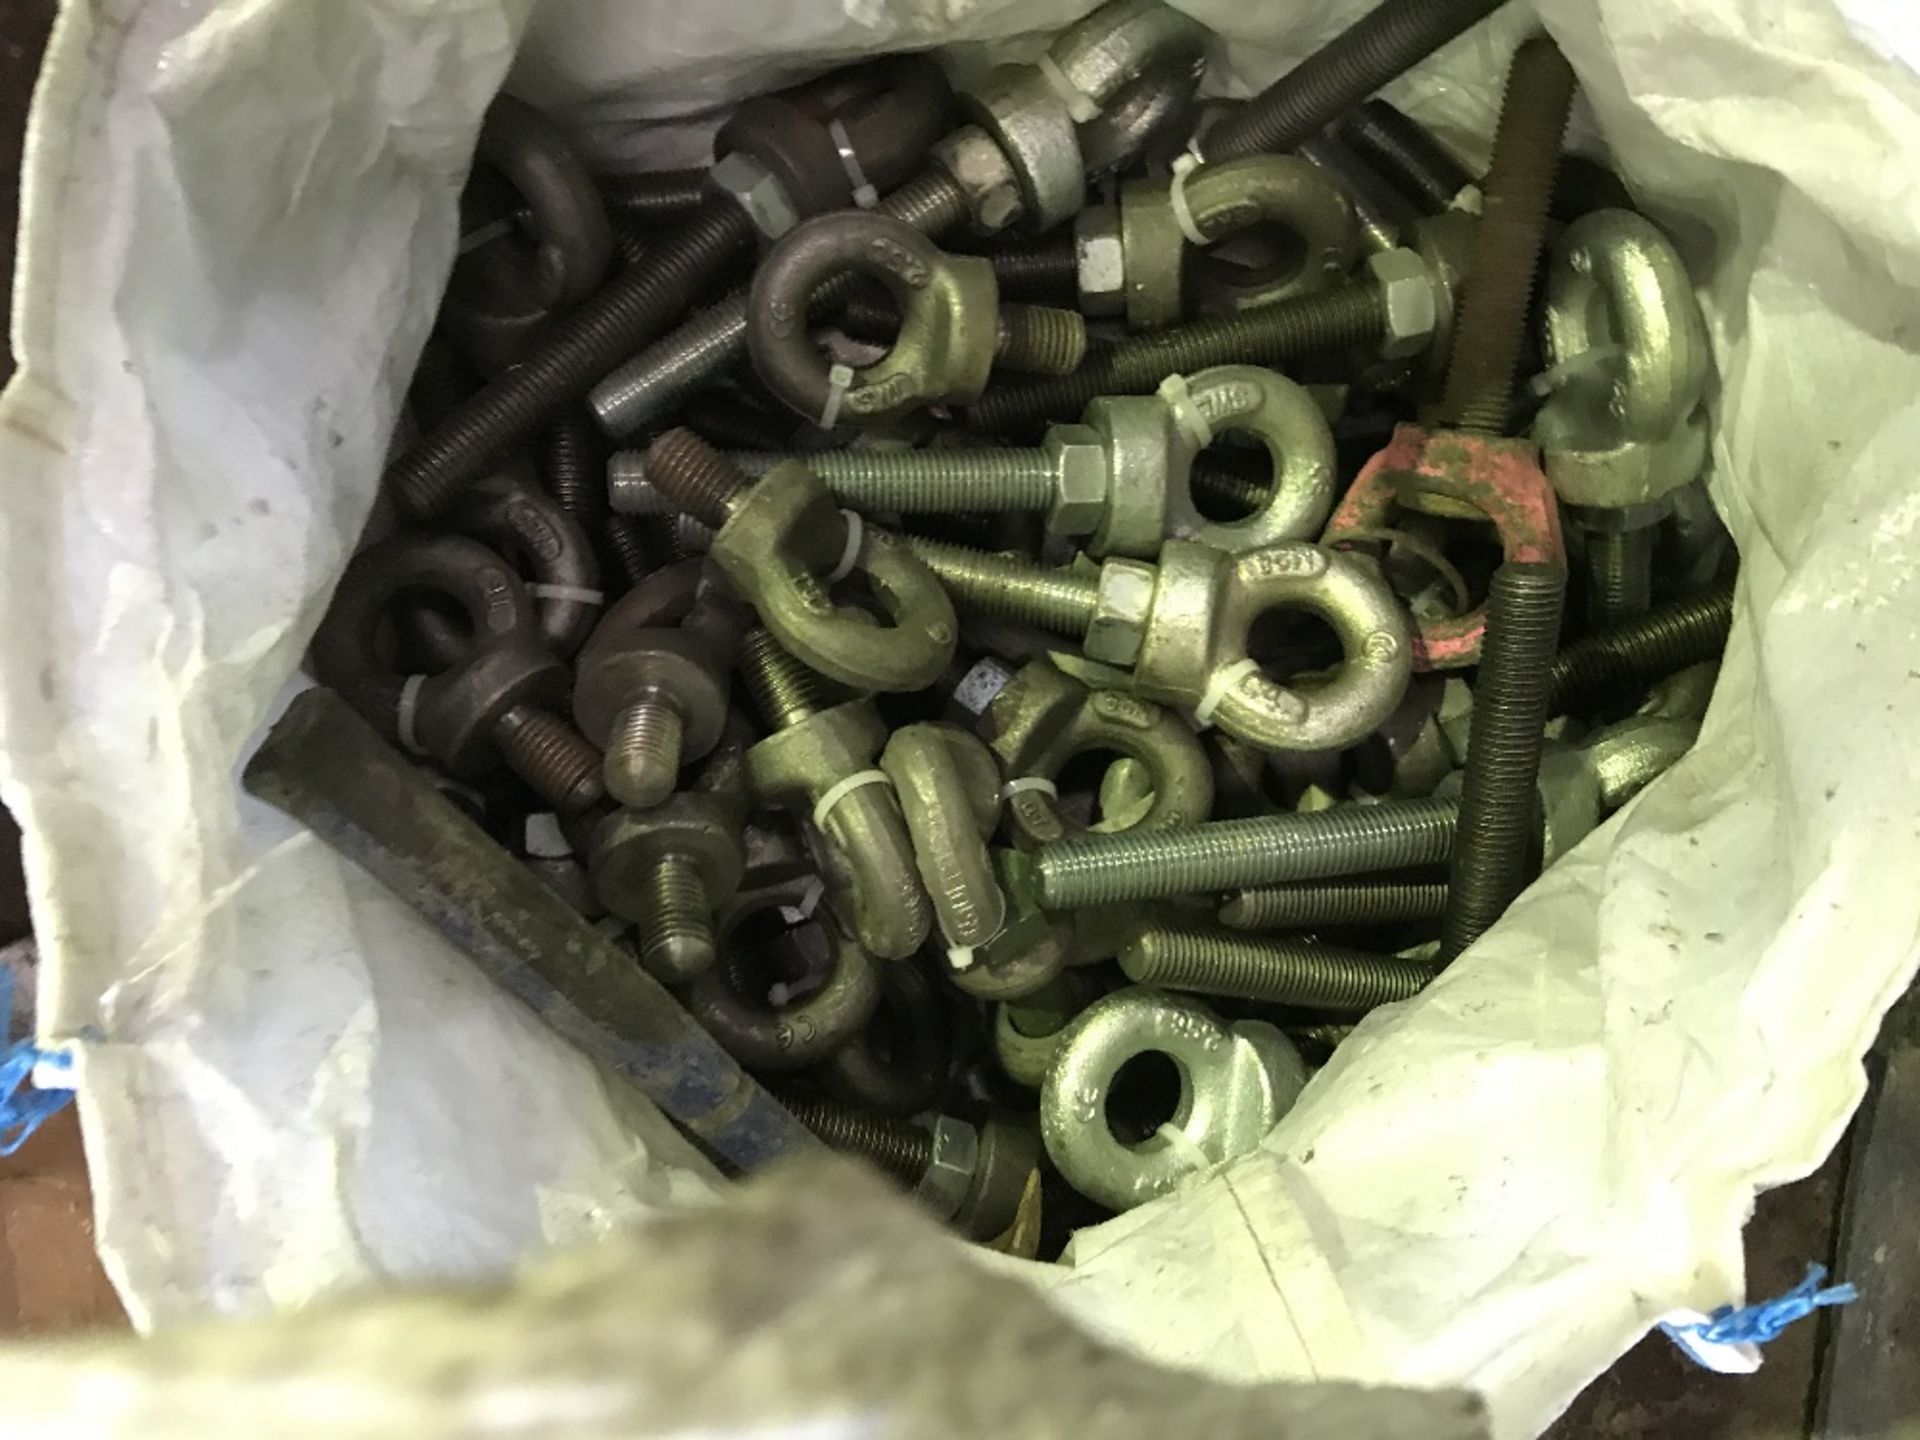 LARGE QTY OF EYE LIFTING BOLTS, MOST APPEAR UNUSED, UNTESTED - Image 2 of 3